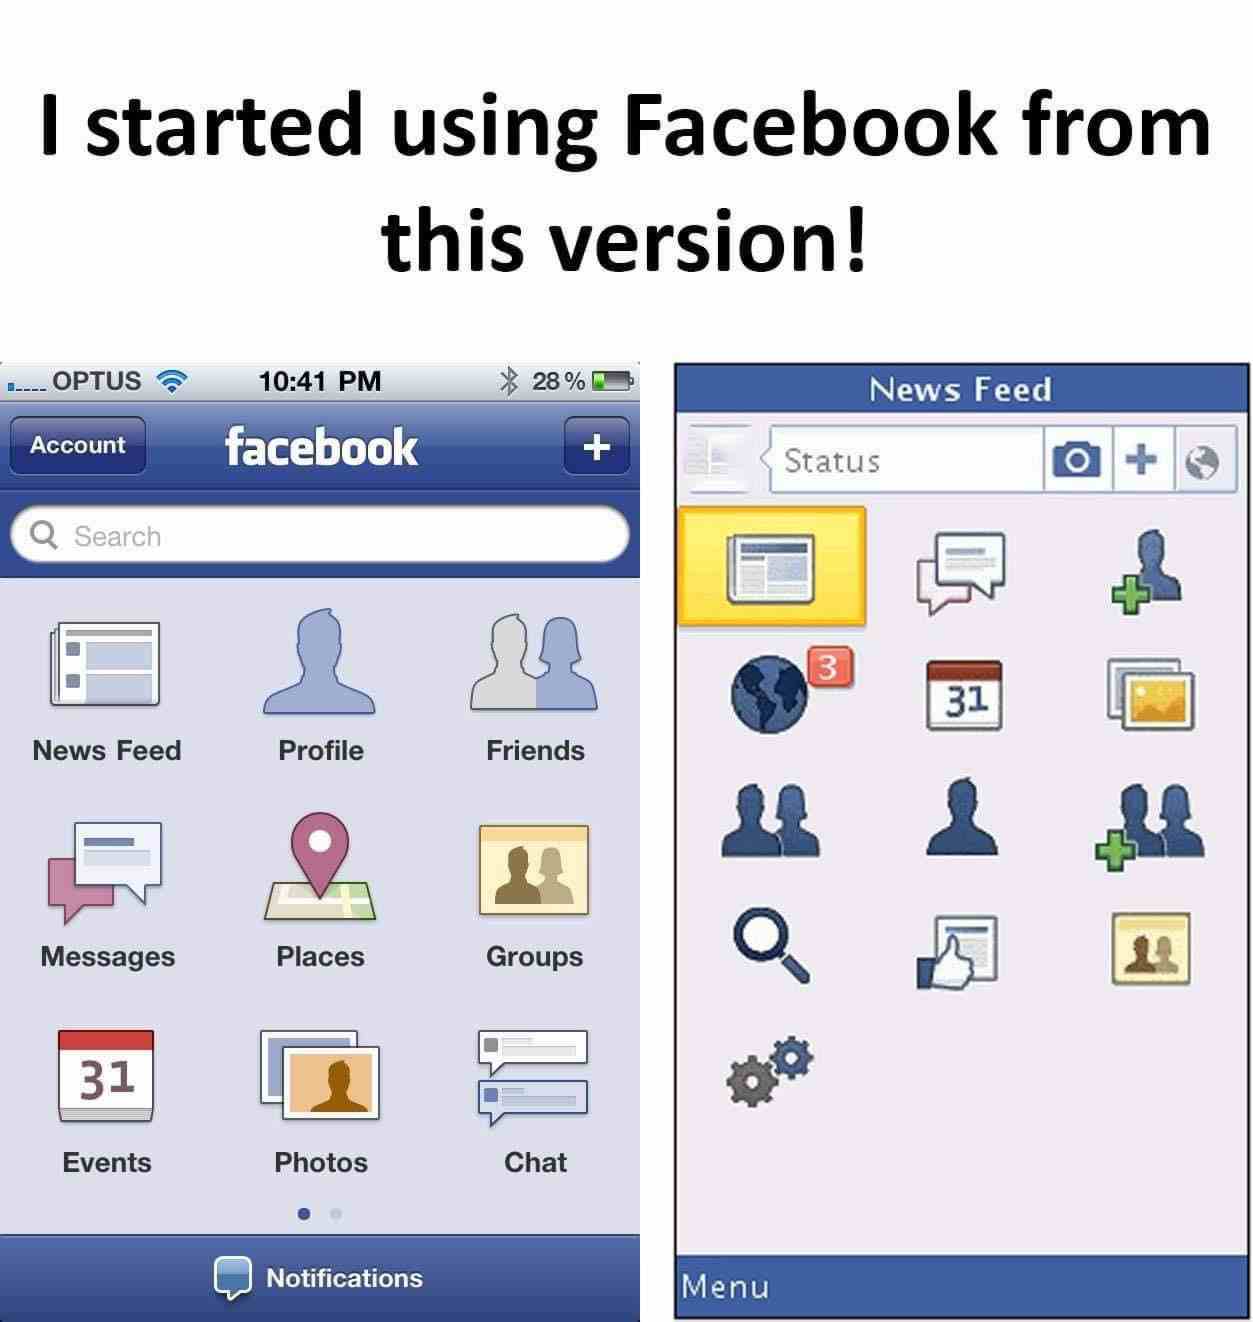 I started using Facebook from this version!